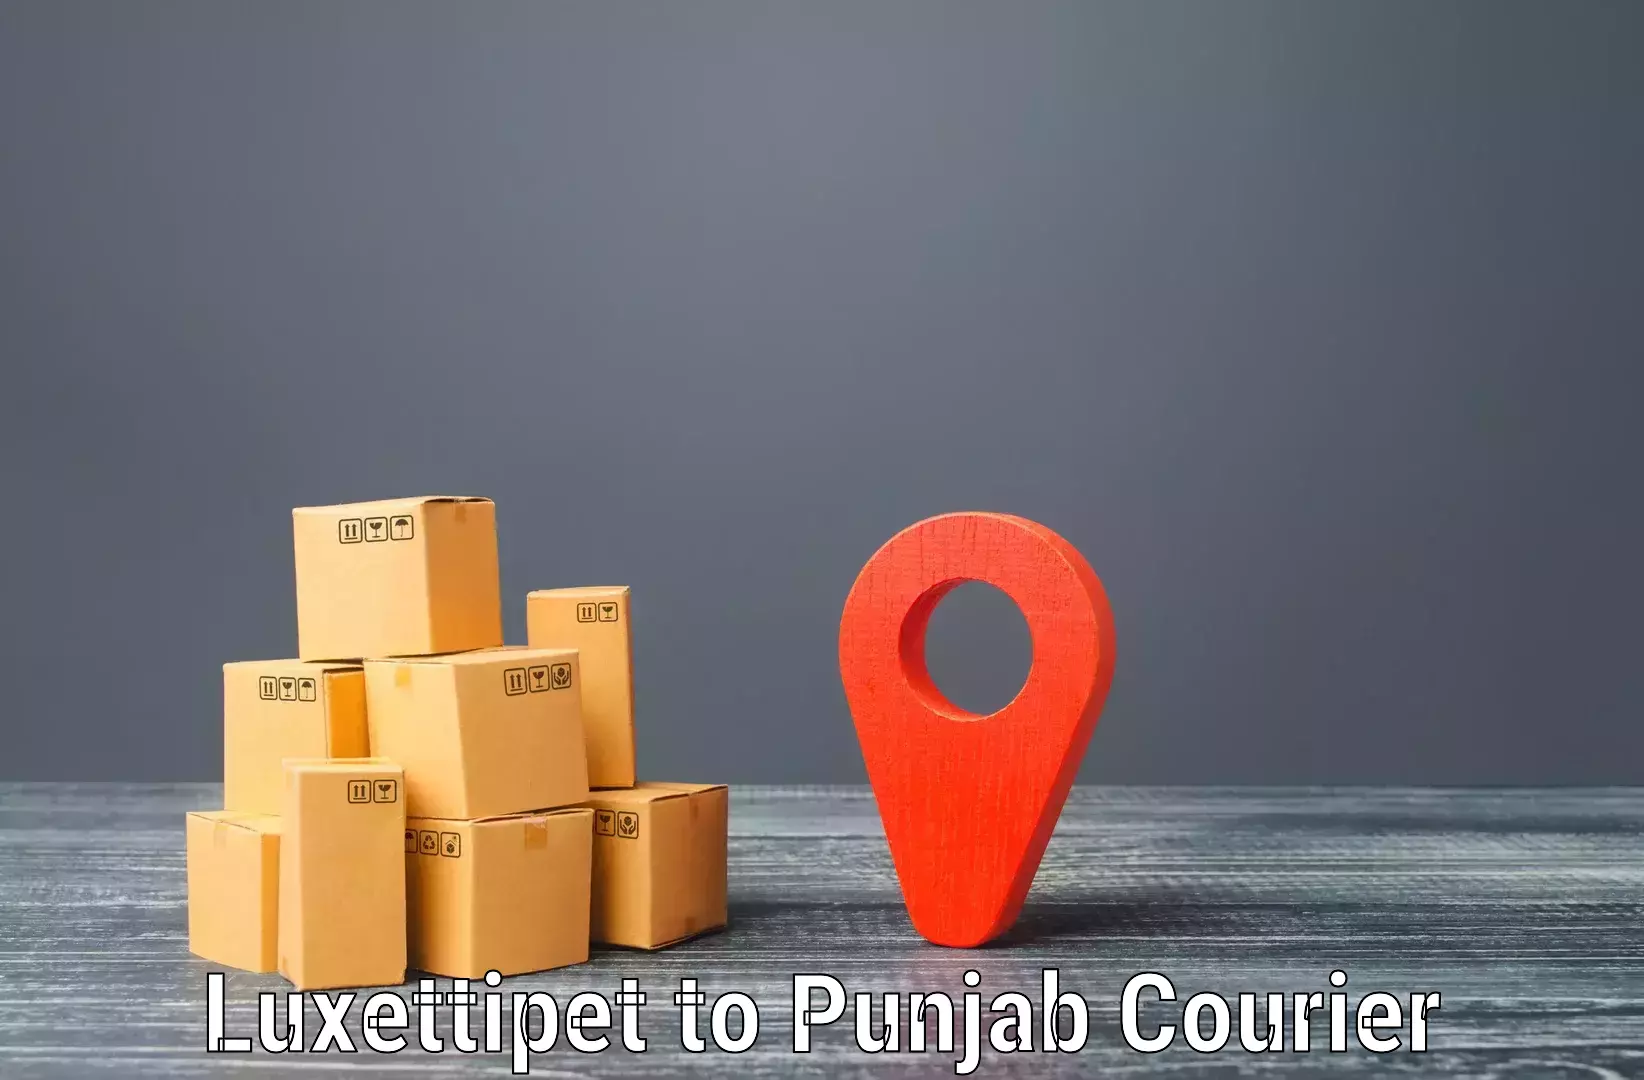 State-of-the-art courier technology Luxettipet to Amritsar